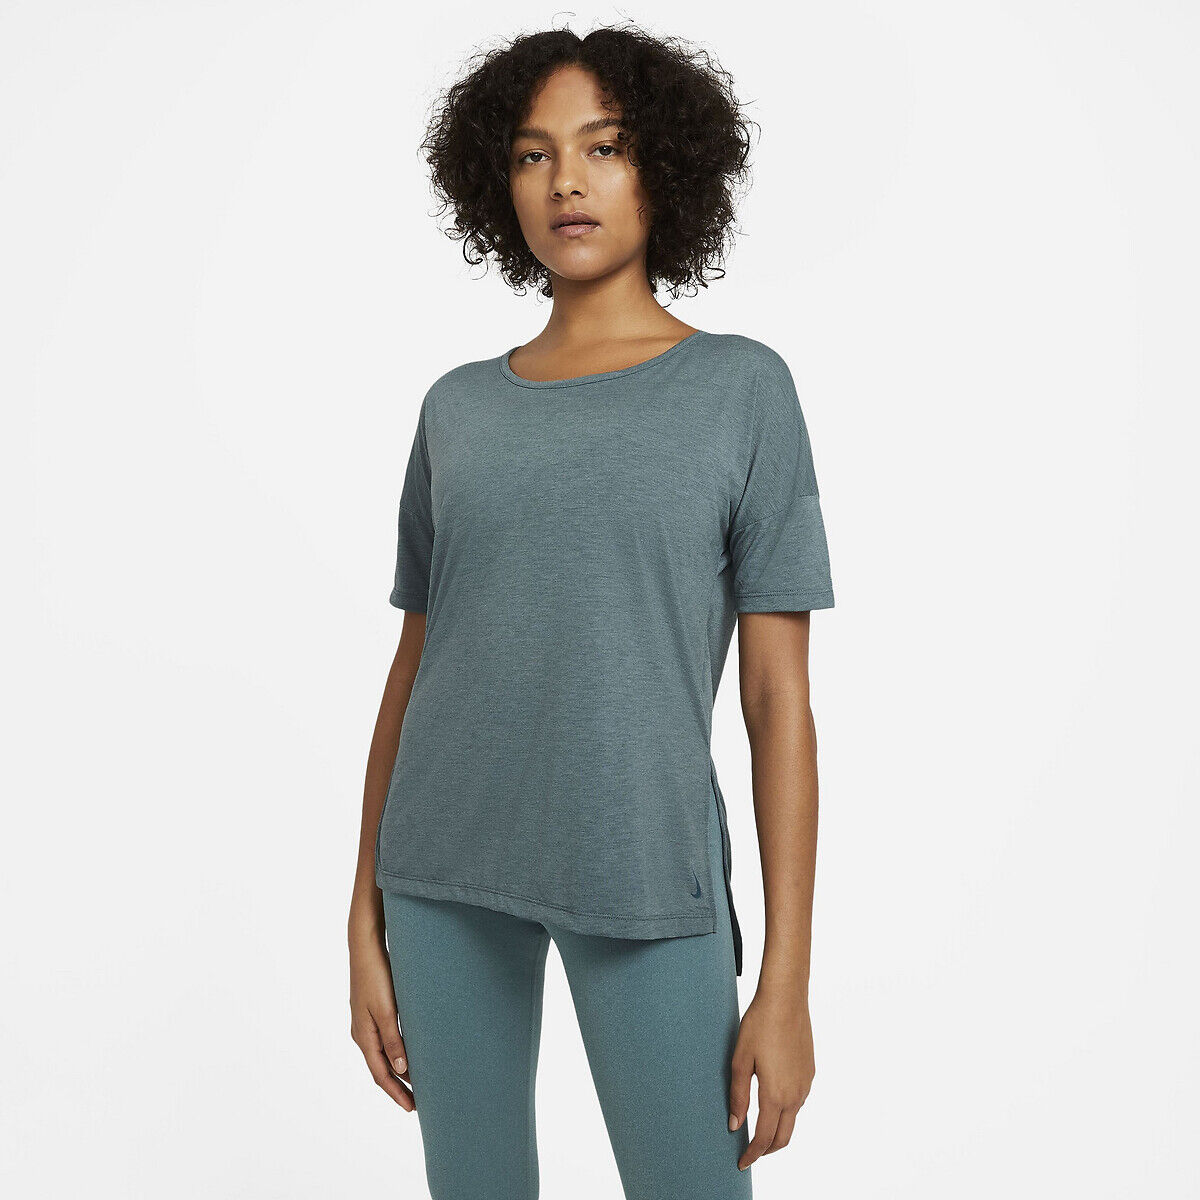 NIKE T-shirt yoga manches courtes, col rond